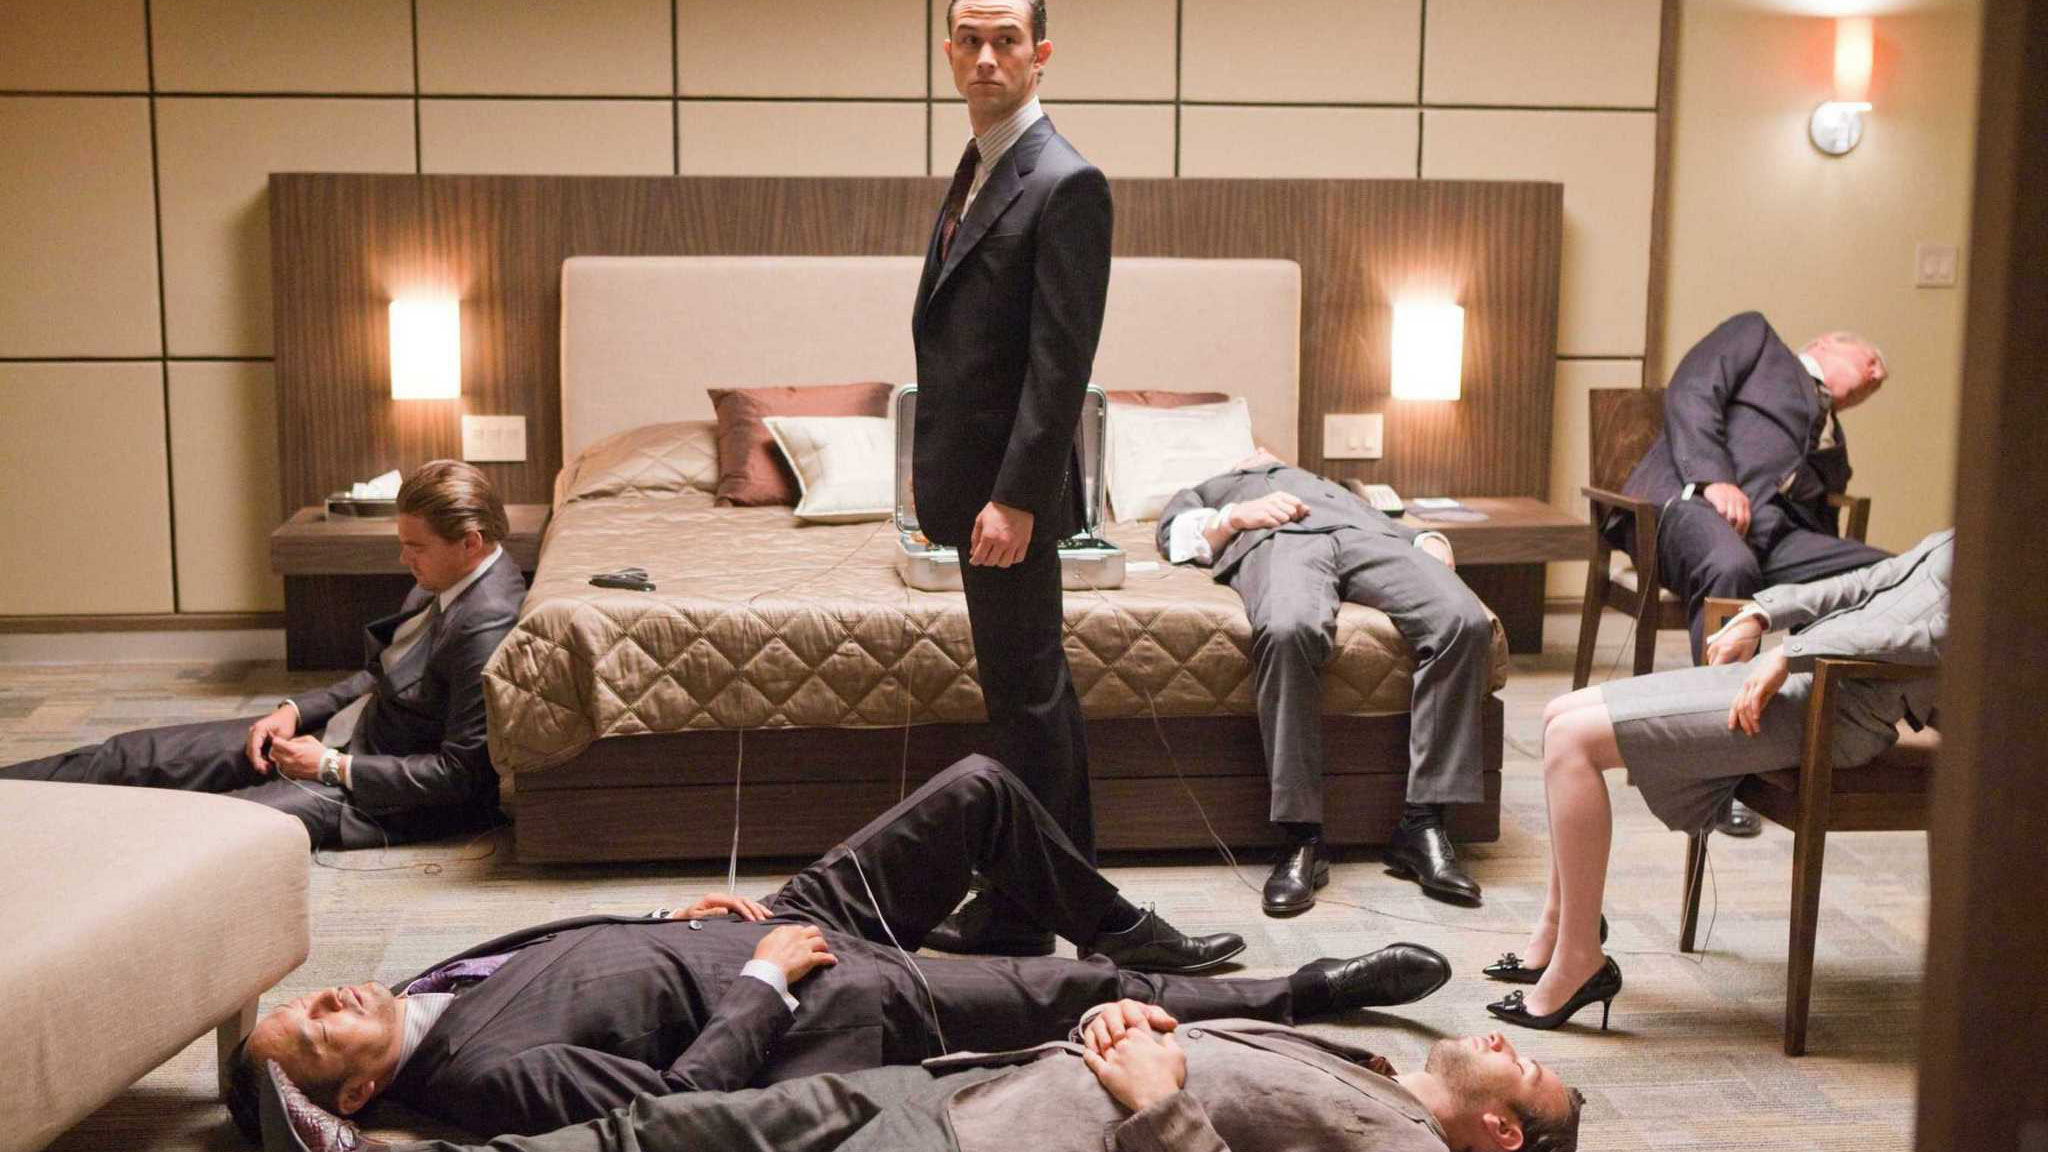 A still from Inception